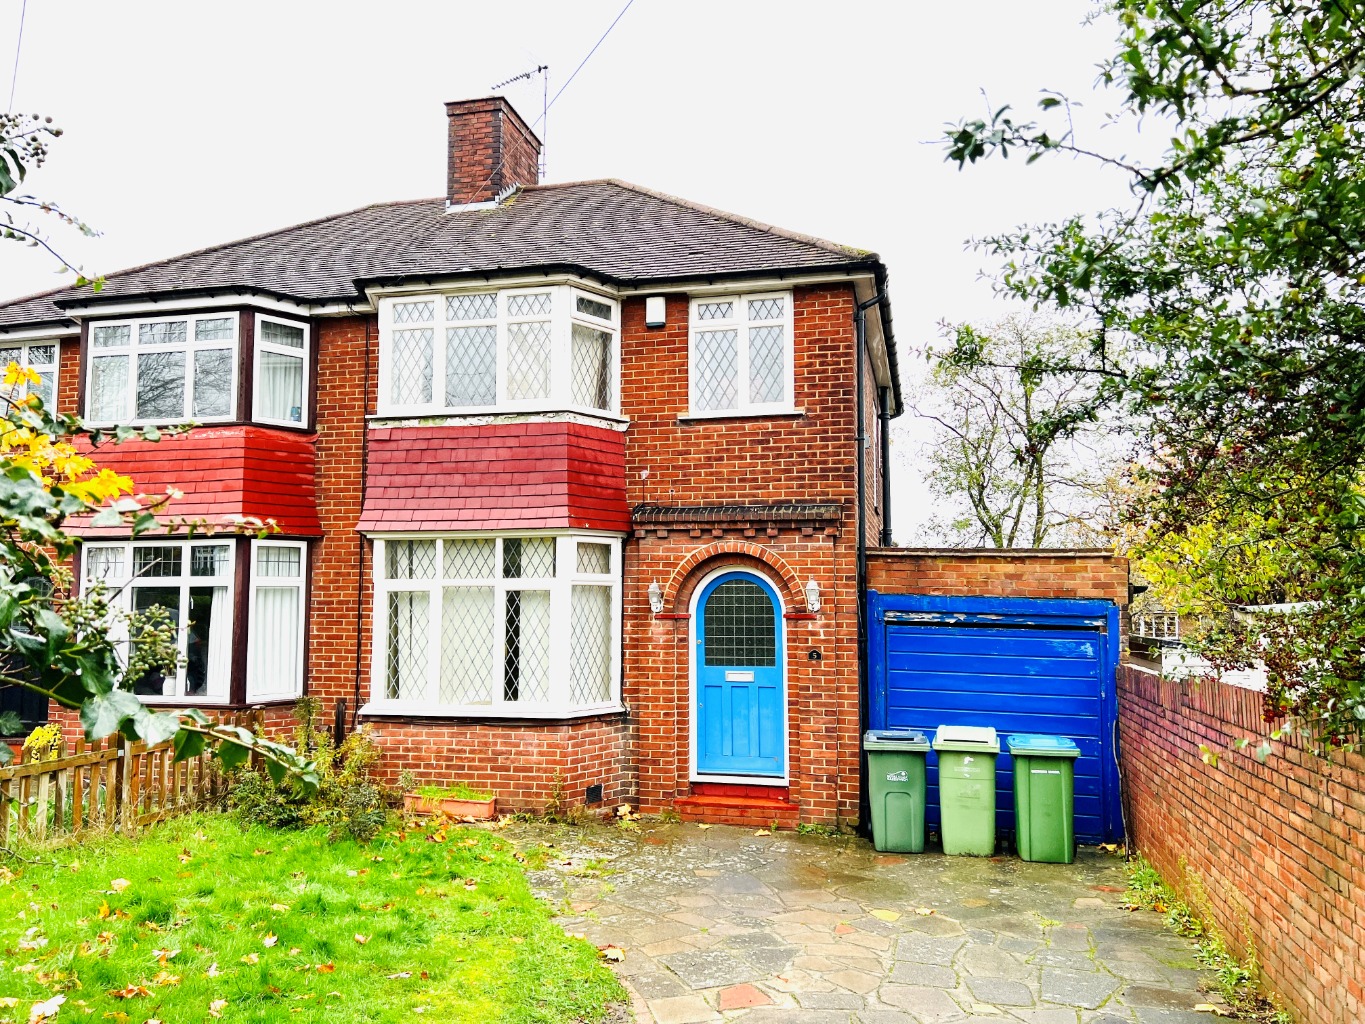 Rarely available in this location can be found this three bedroomed semi detached family home for rent.